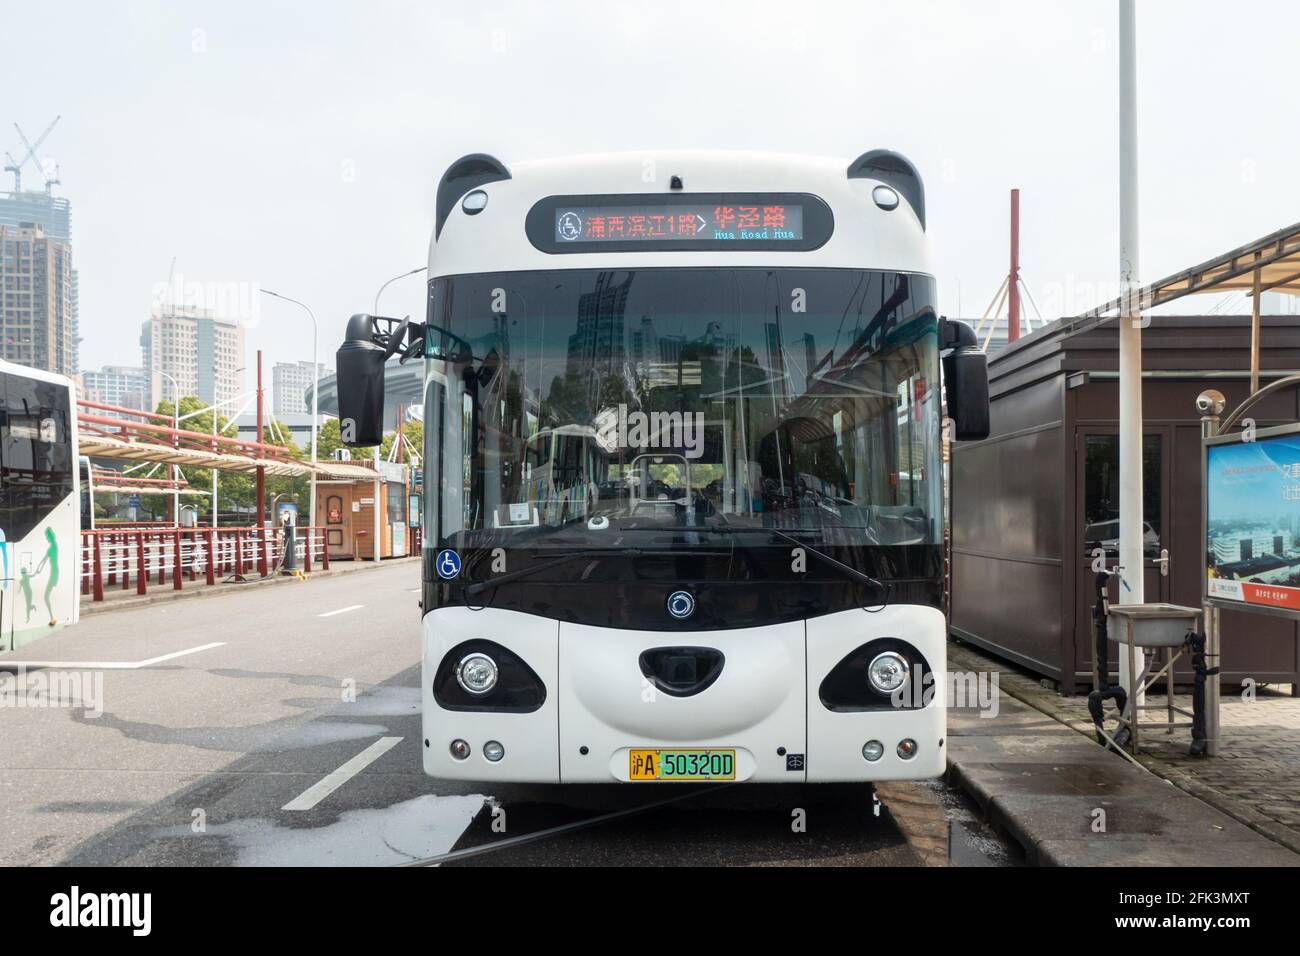 Shanghai, Shanghai, China. 28th Apr, 2021. On April 28, 2021, in Shanghai, at a bus station near the Nanpu Bridge, a staff member is cleaning a cute panda car. On April 27, 4 super cute panda buses were put into operation on Binjiang 1 Road in Puxi, adding a moving landscape along the riverside. The two ''big eyes'' on the front of the panda car not only come with dark circles, but there are actually two round black ''small ears'' on the roof. From a distance, it is a cute cartoon panda. It is reported that the panda bus is a new type of pure electric barrier-free bus. The barrier-free pe Stock Photo